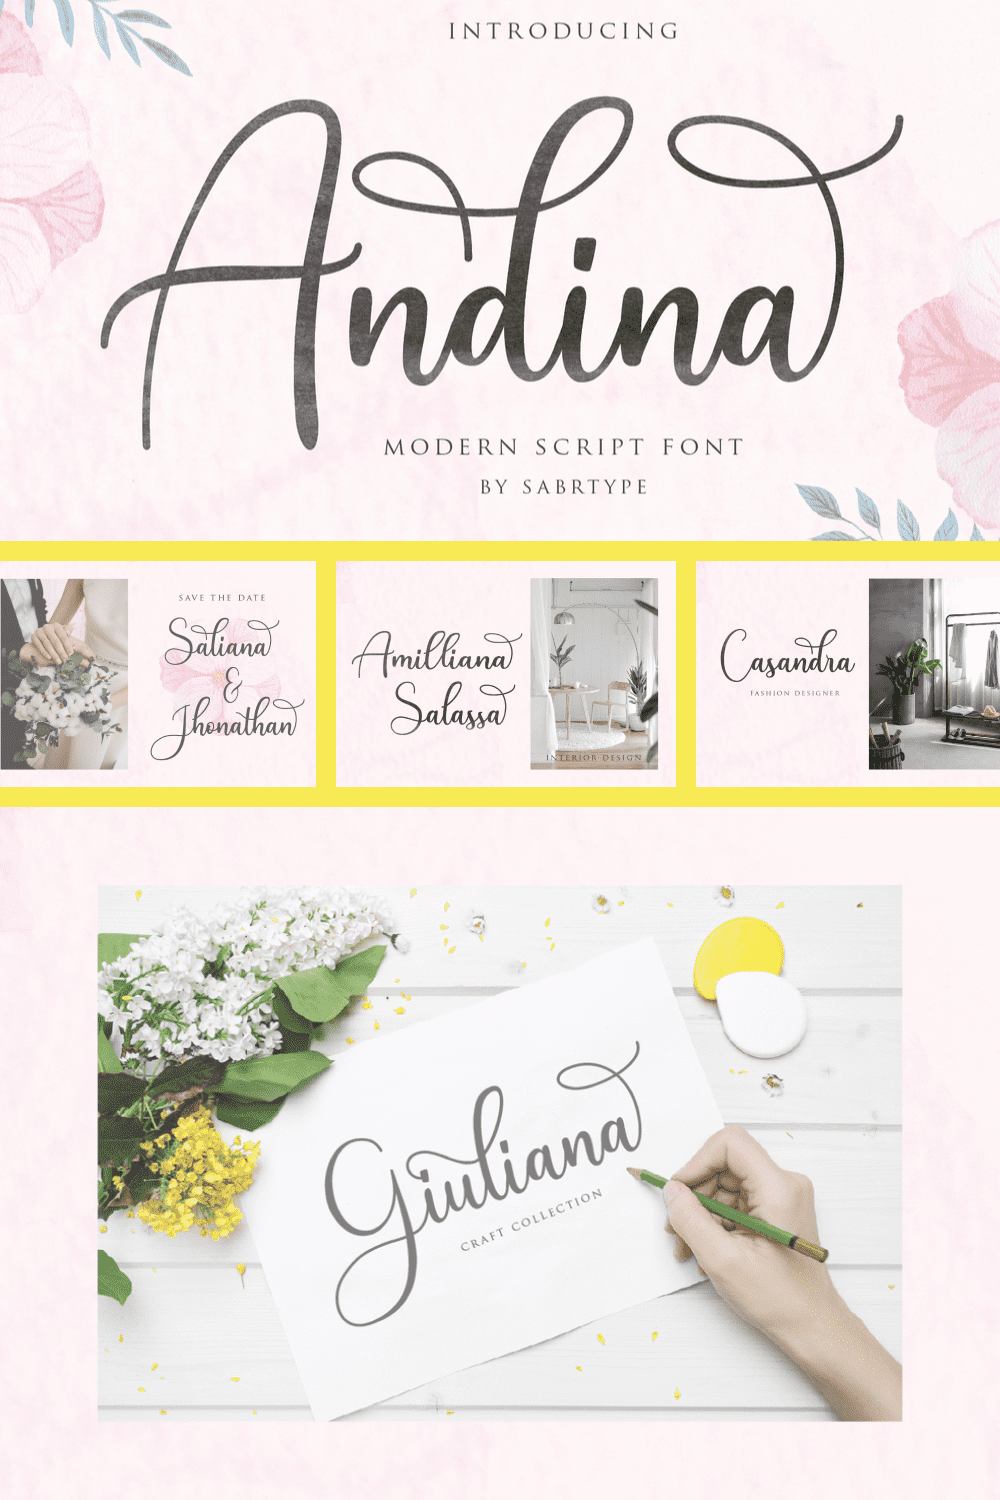 It is an inspirational font perfect for weddings and romantic evenings.